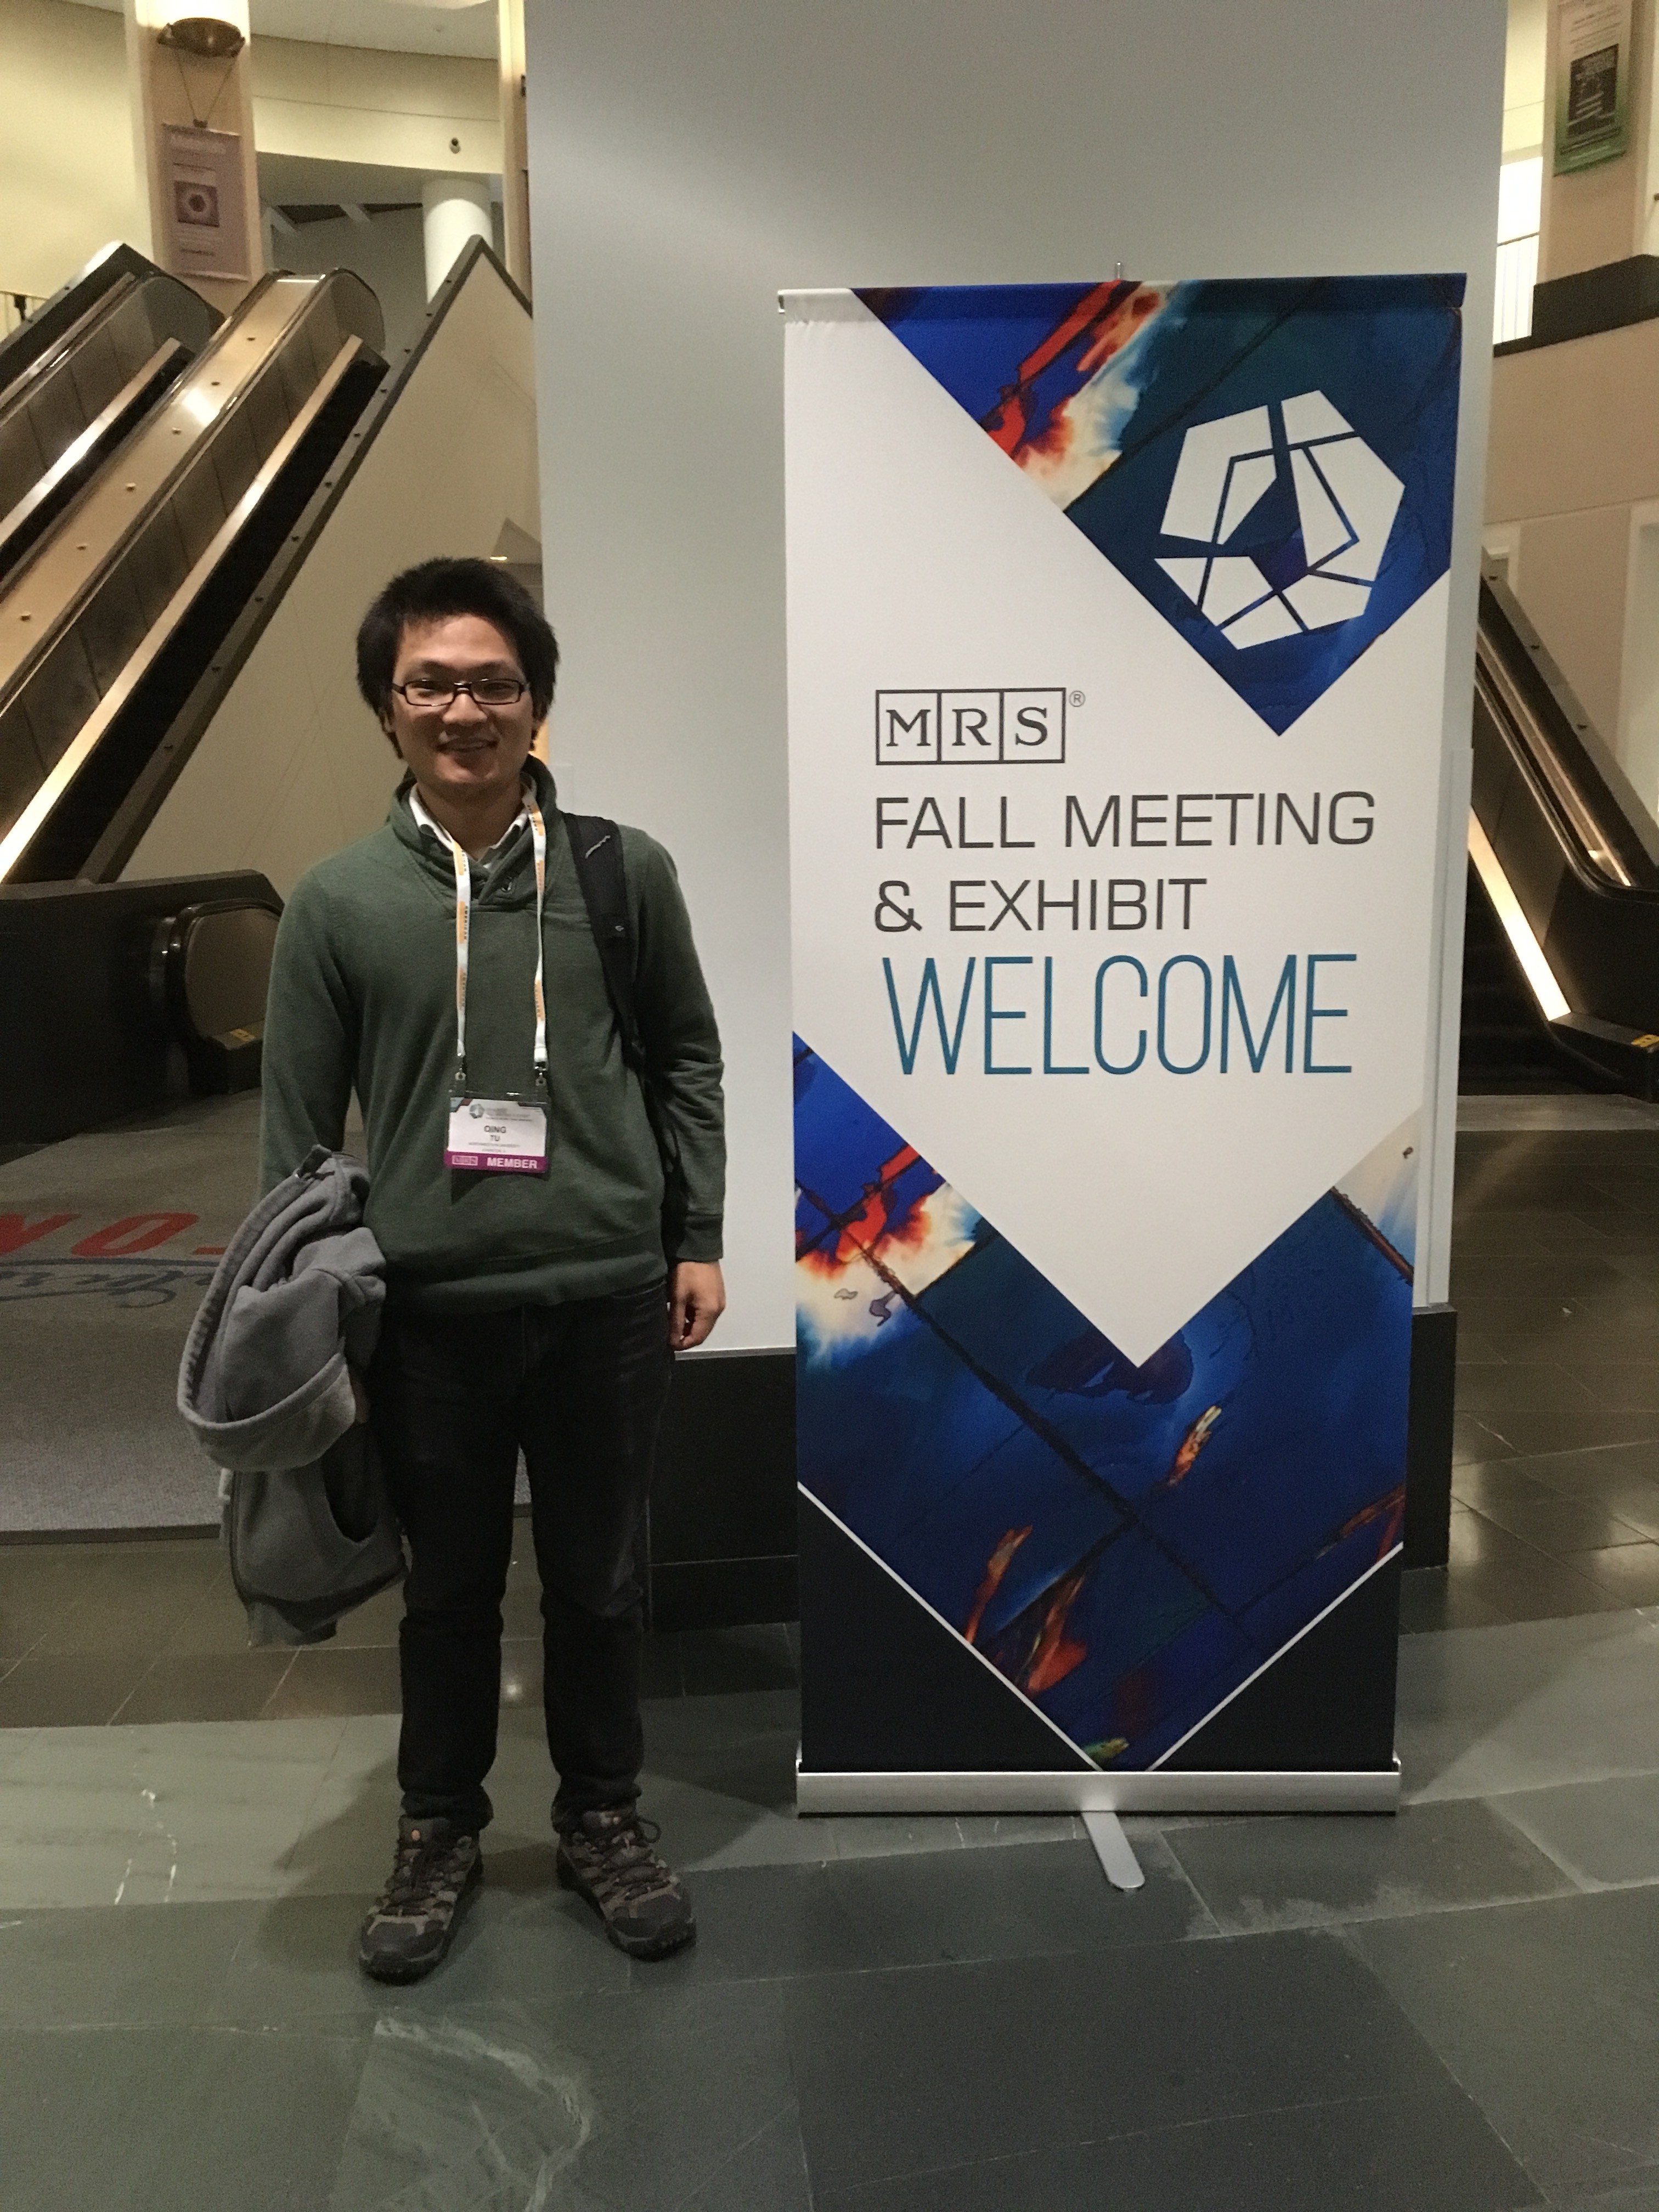 Qing Tu presented his work at the Materials Research Society's fall meeting in Boston.